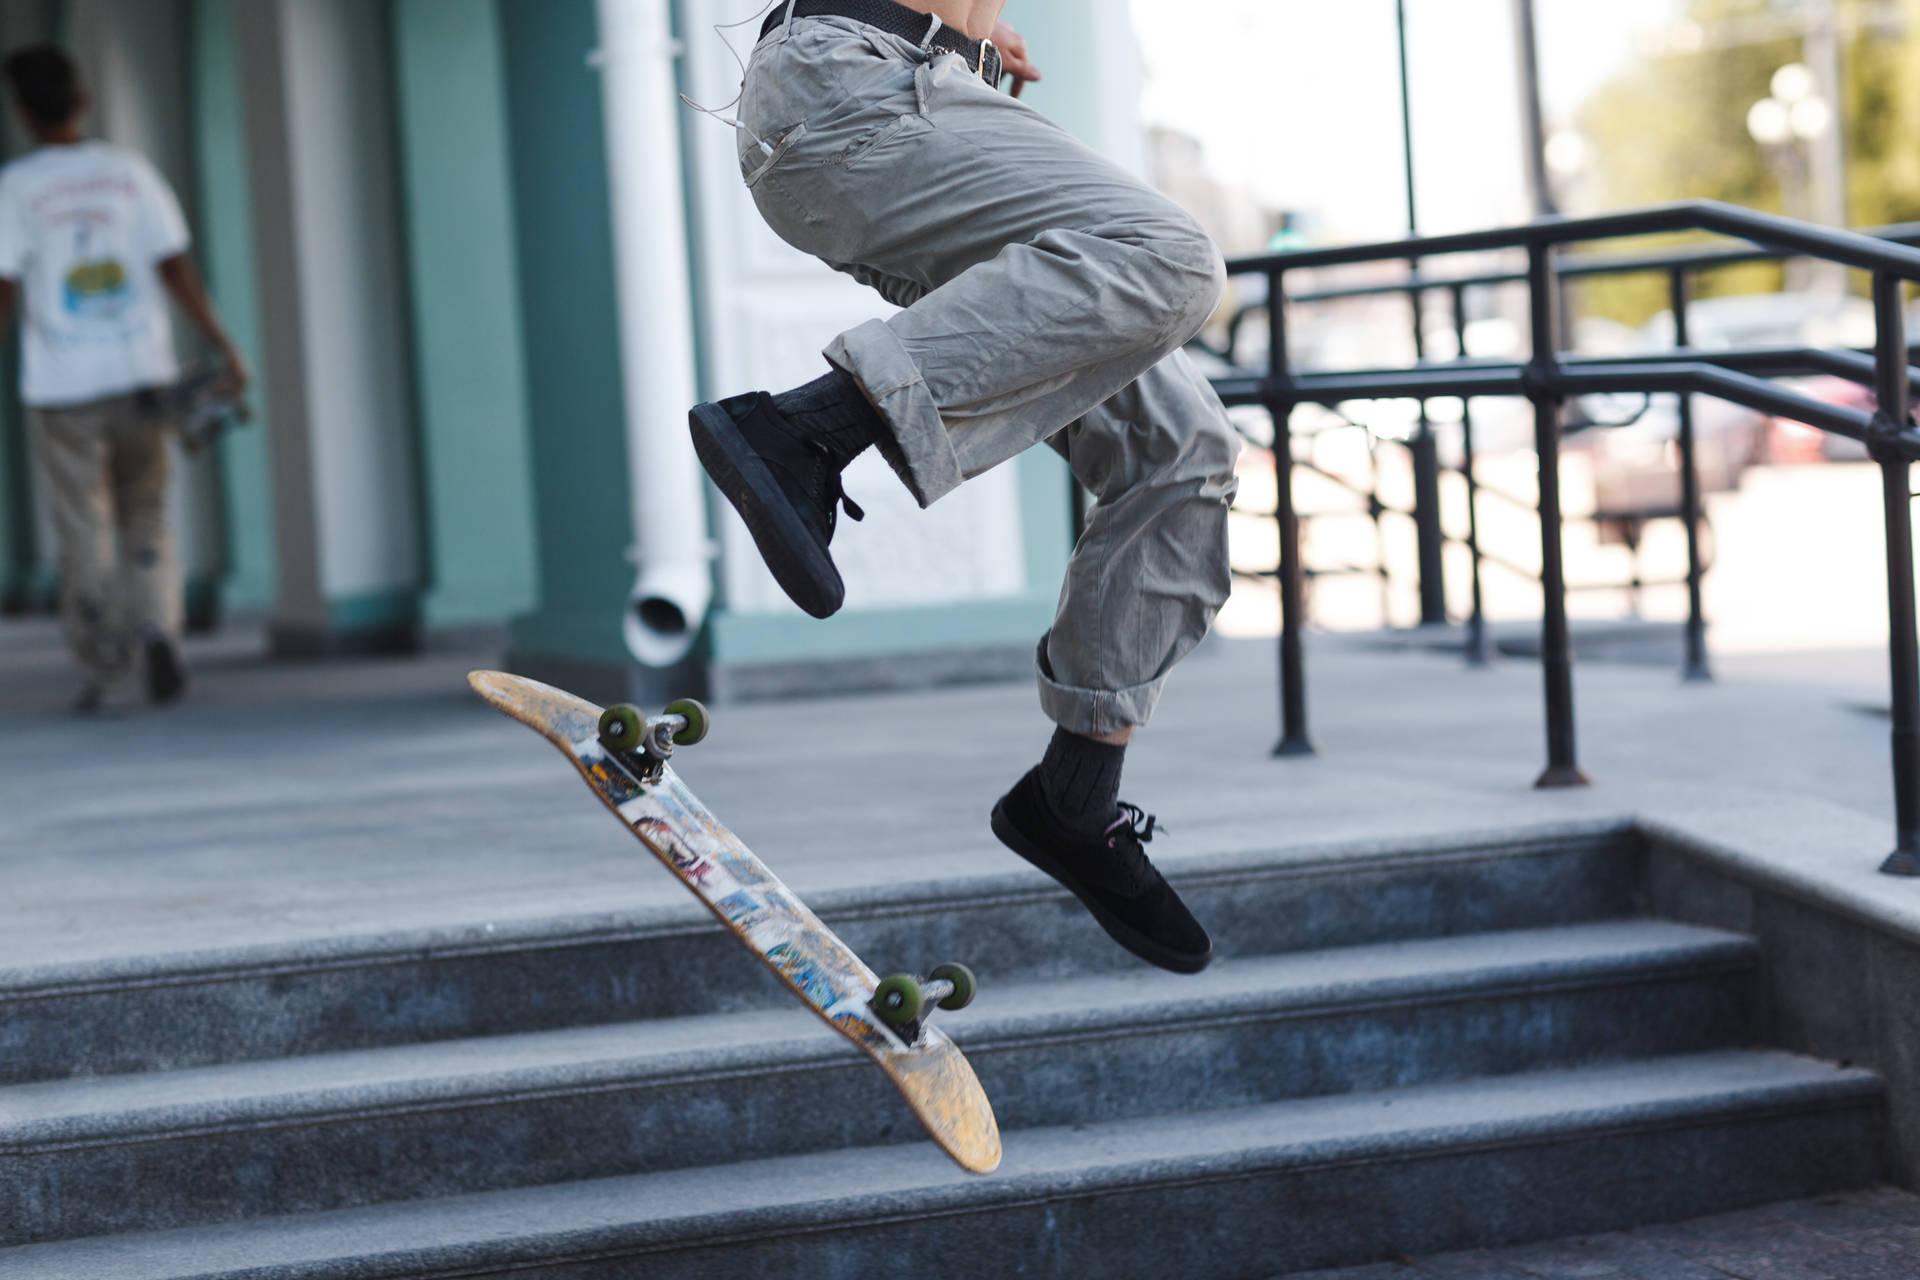 Achieve amazing feats with a skateboard Wallpaper